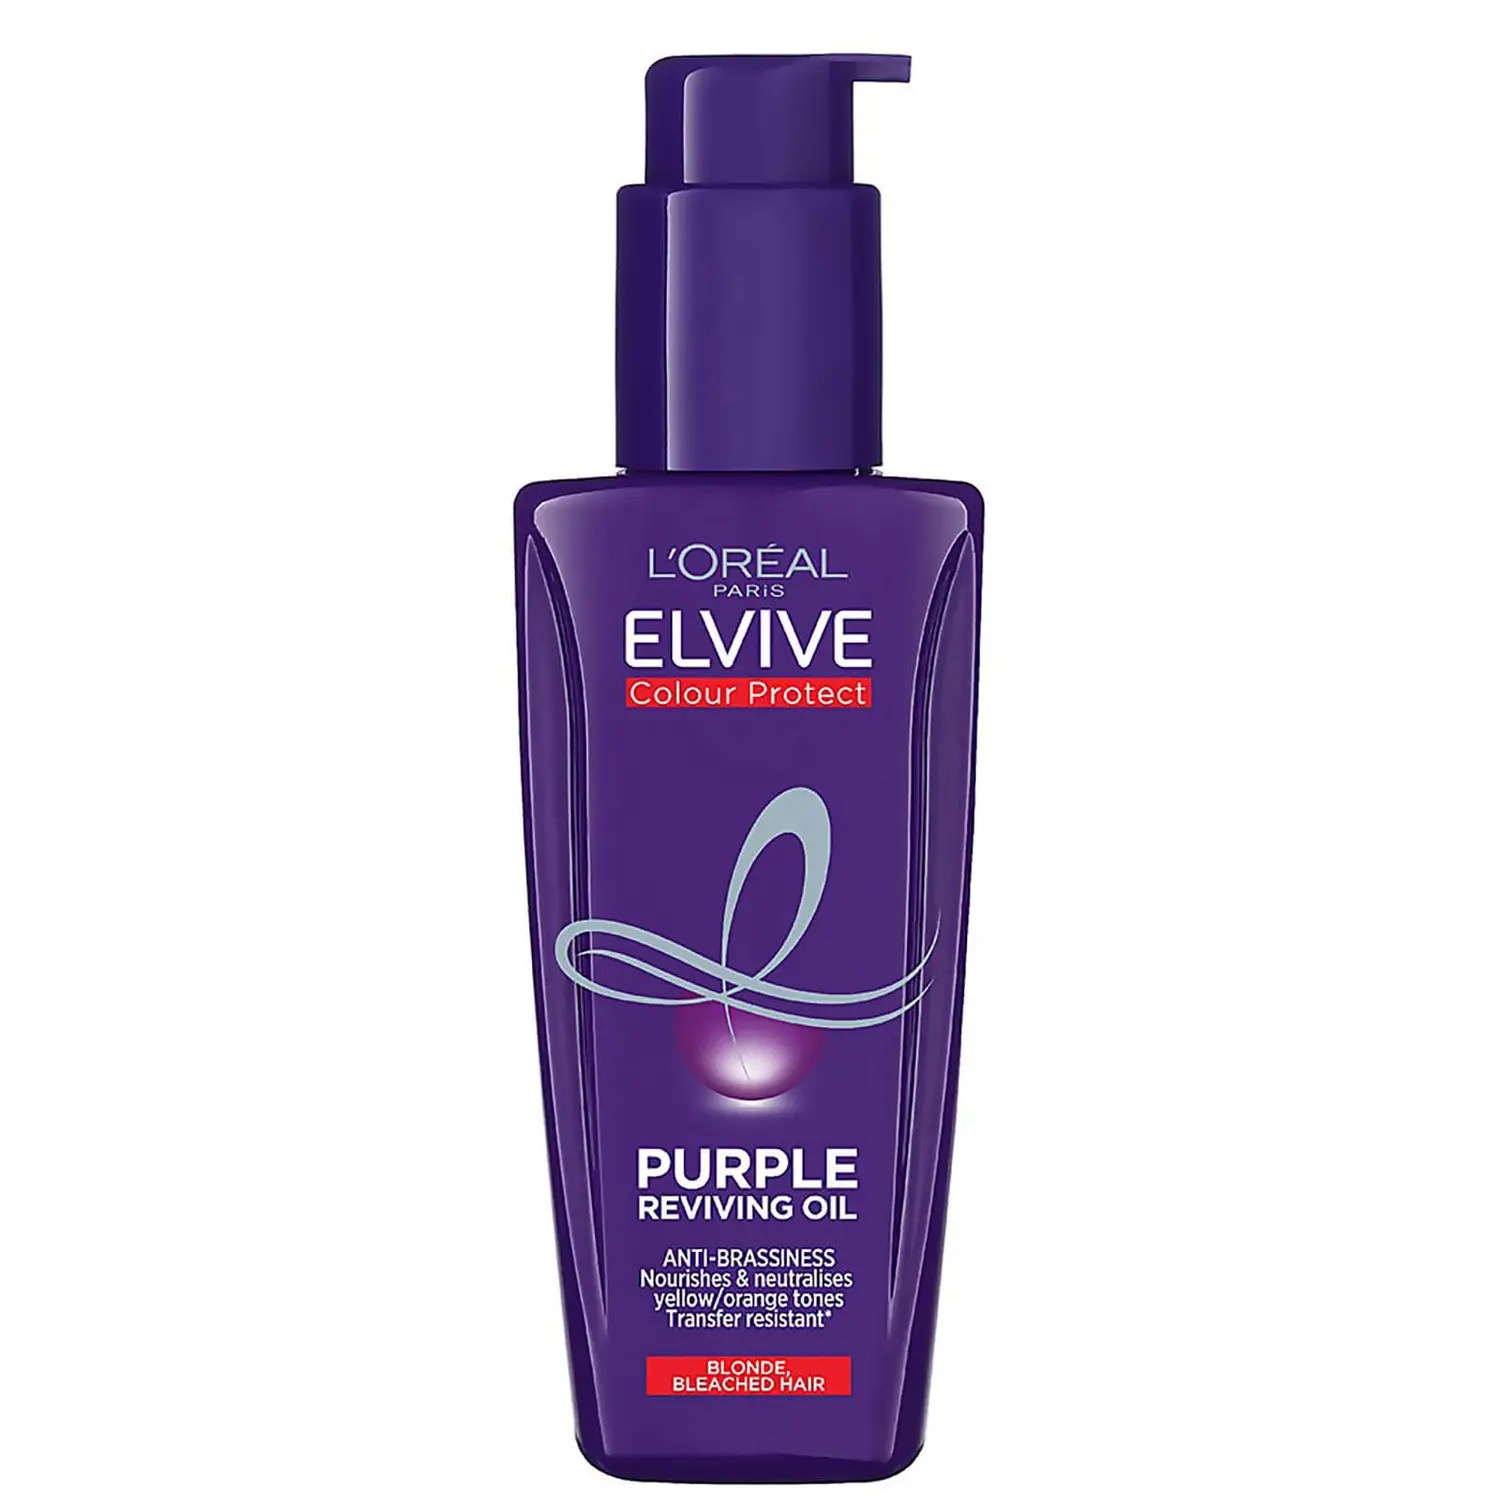 L’Oreal Paris, Elvive Colour Protect Purple Anti-Brassiness Hair Oil (Source: www.lookfantastic.co.in)